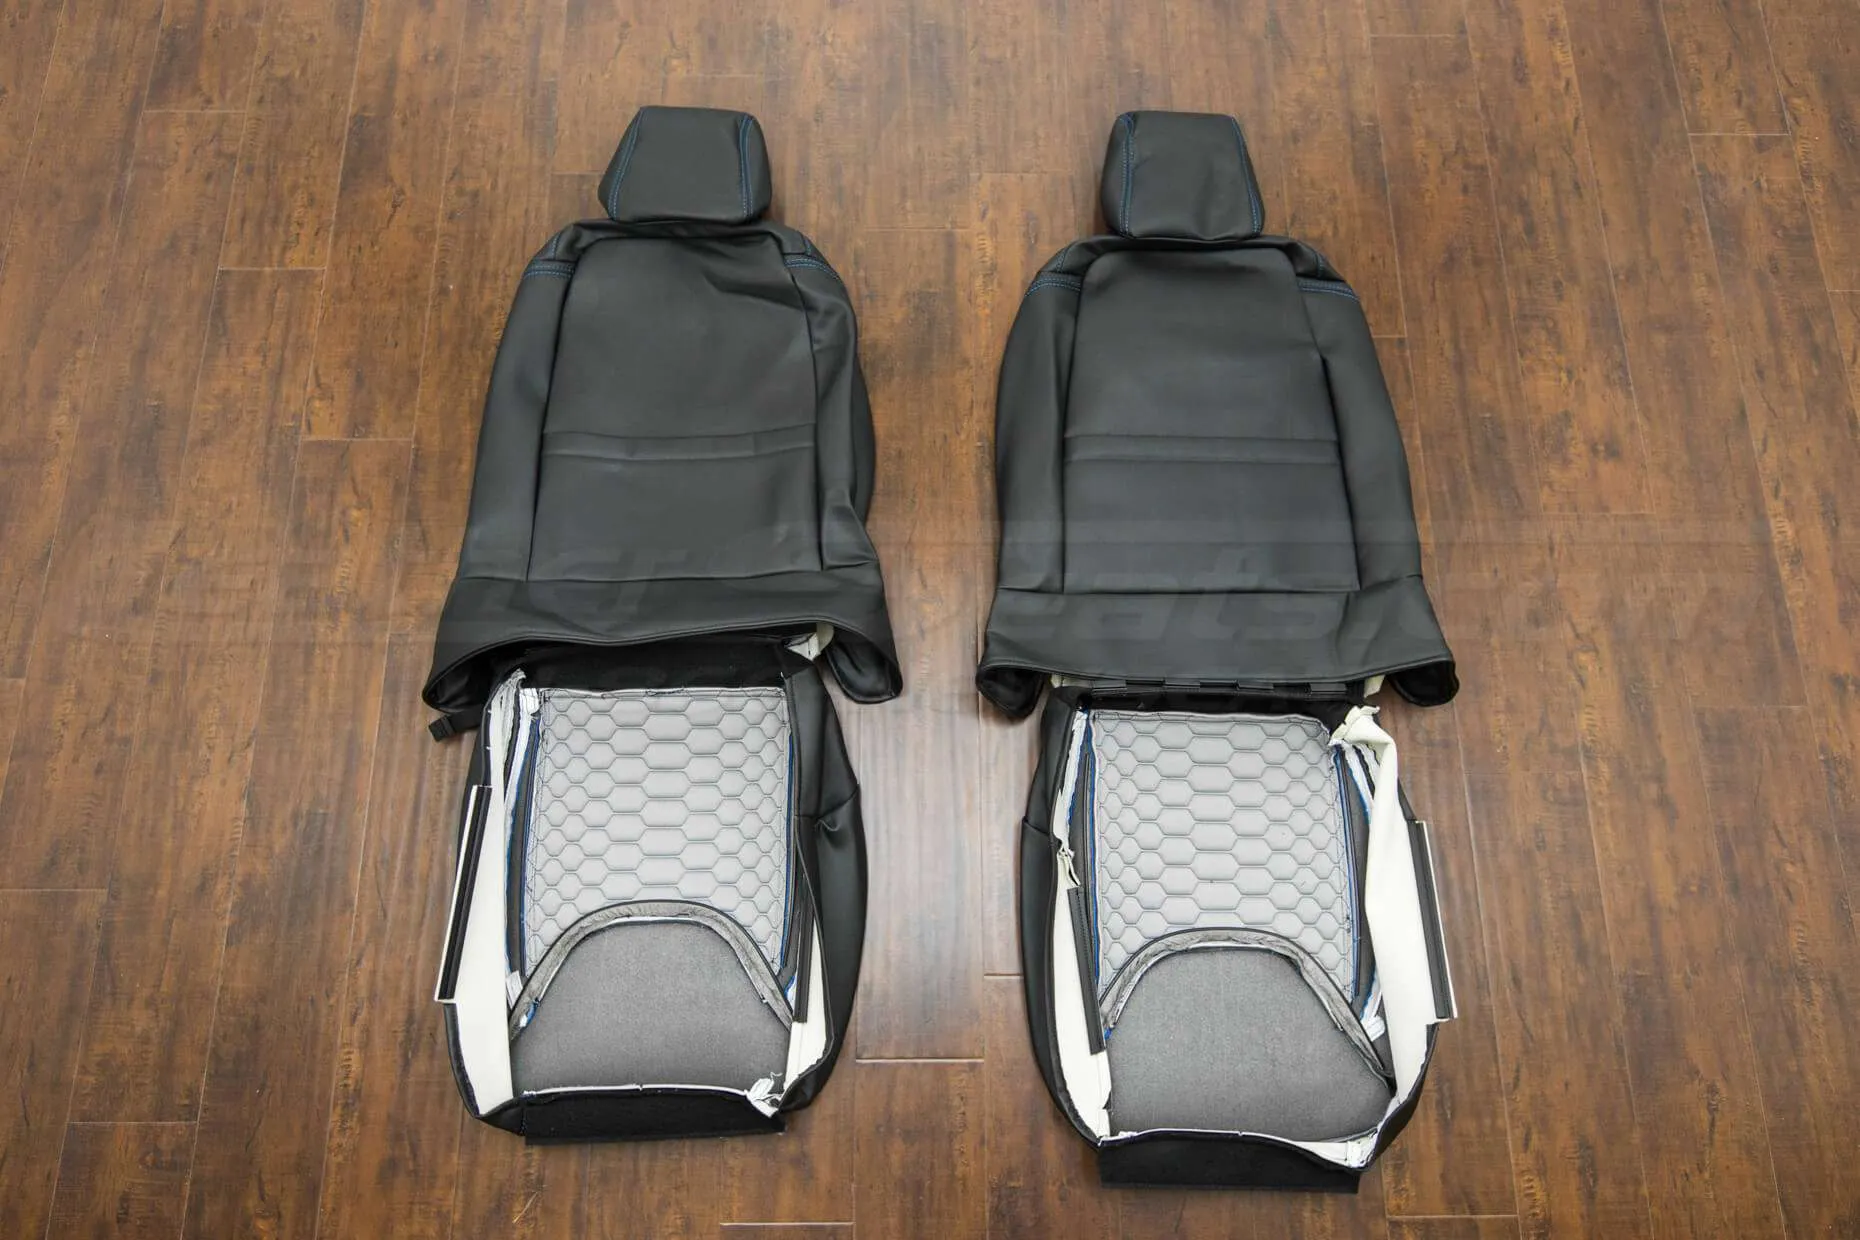 2013-2018 Jeep Wrangler Bespoked Leather Seats - Black & Cobalt - Back view of front seats